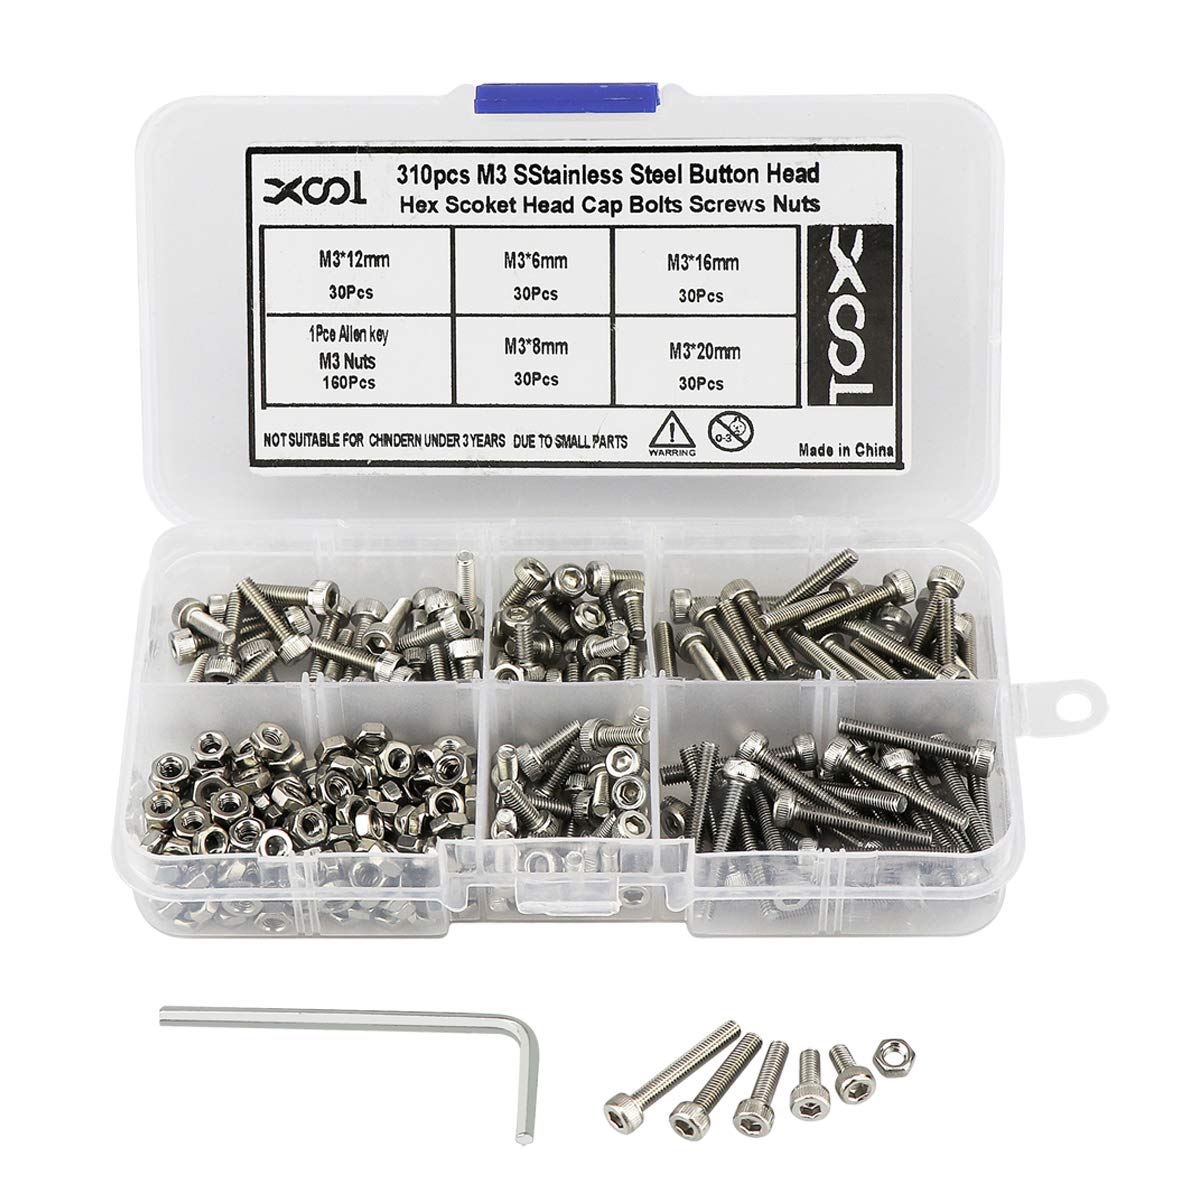 M3 Stainless Steel Hex Socket Head Cap Screws Nuts Assortment Kit, Allen Wrench Drive, Precise Metric Bolts and Nuts Set with Beautiful Assortment Tool Box for 3D Printed Project, 310 Pcs (Silver) - (For 8 piece(s))